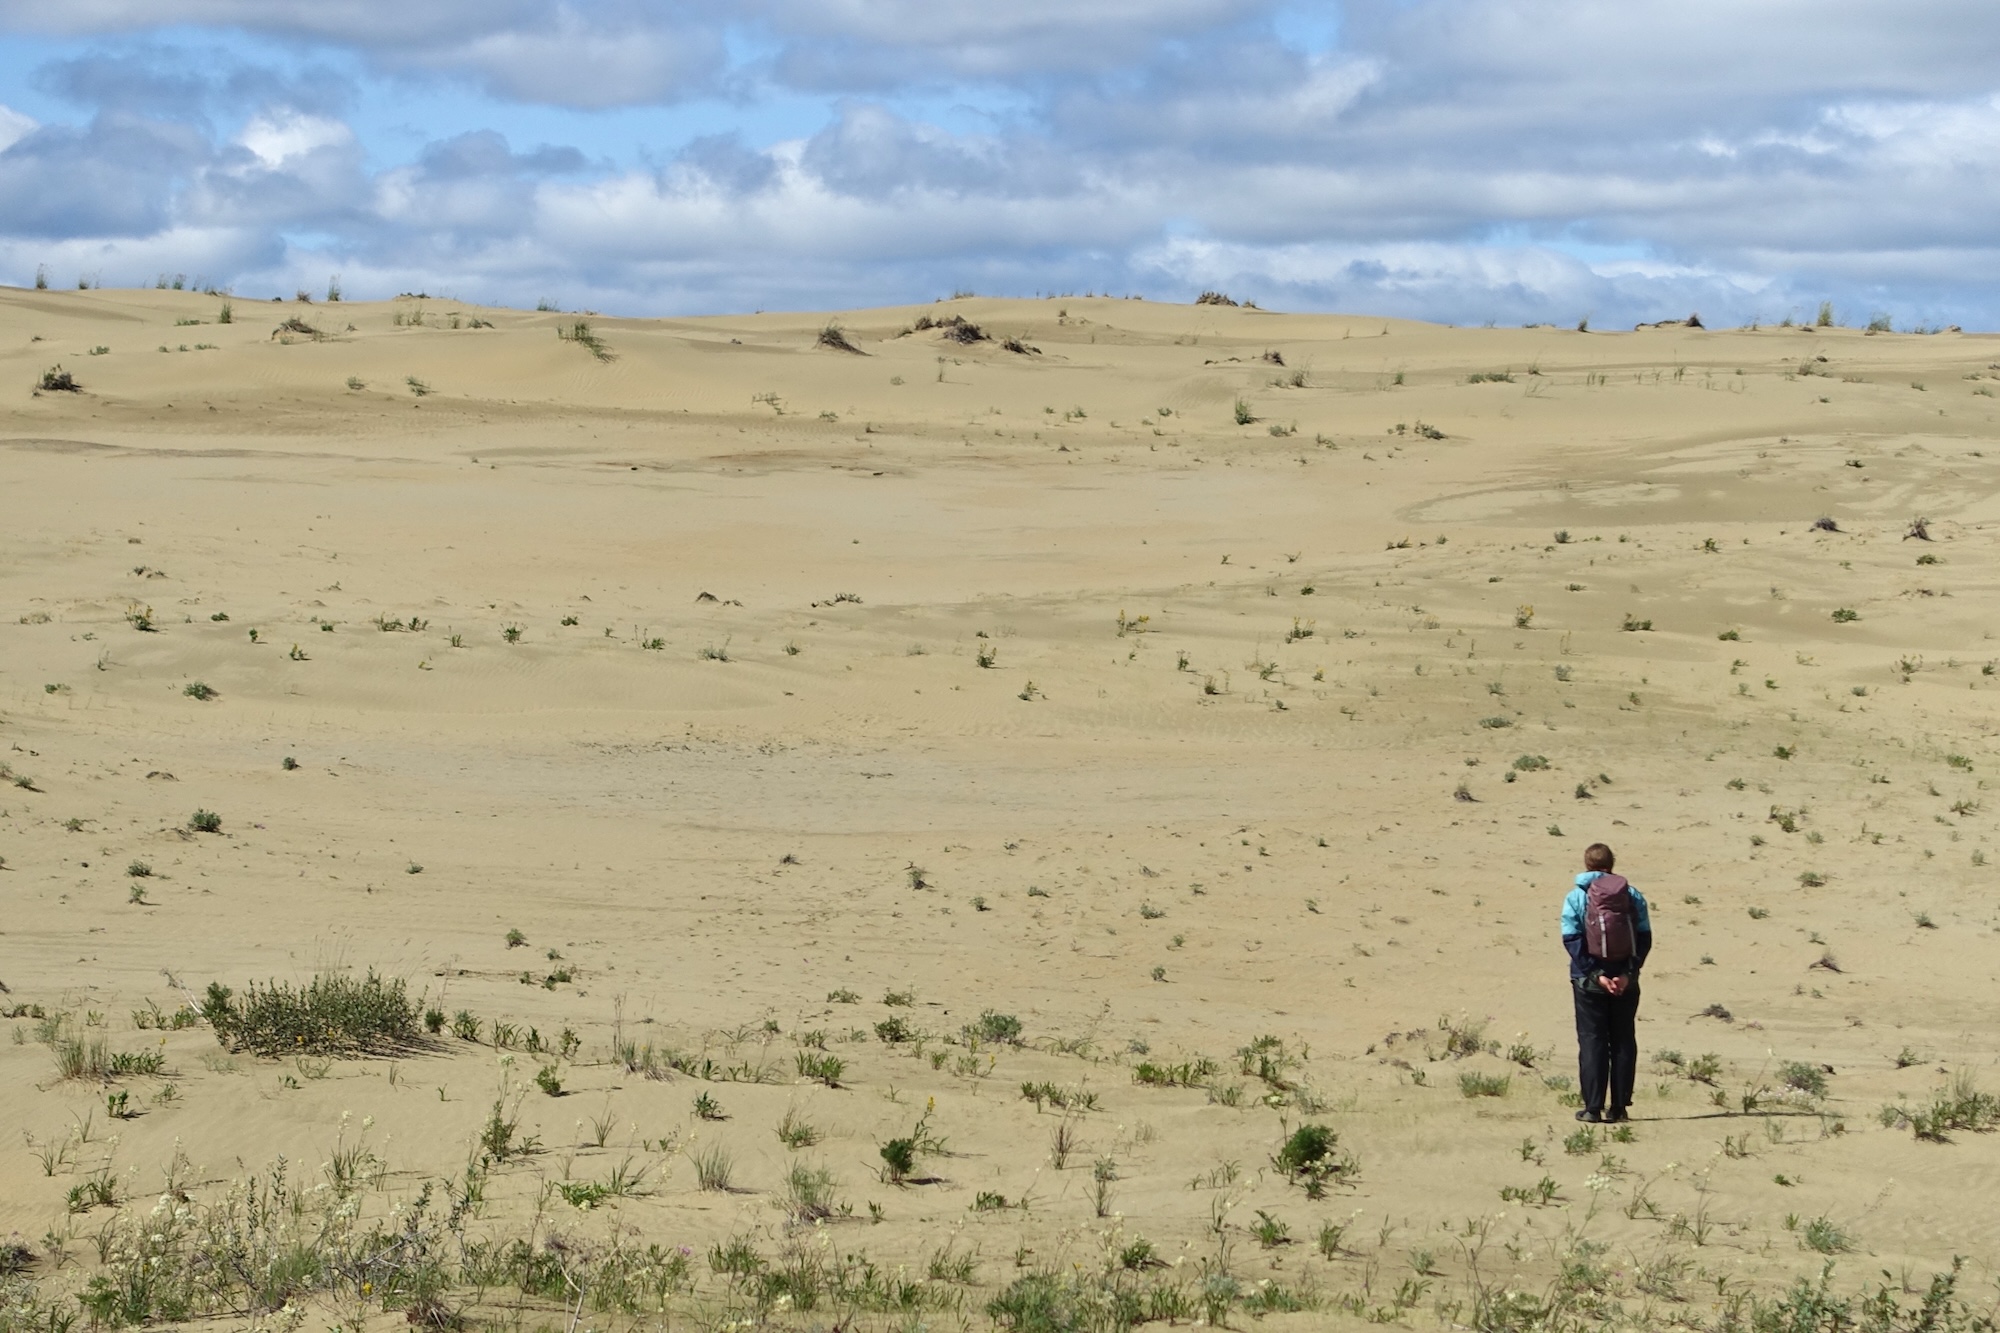 A person stands looking at an expanse of sand studded with small shrubs.